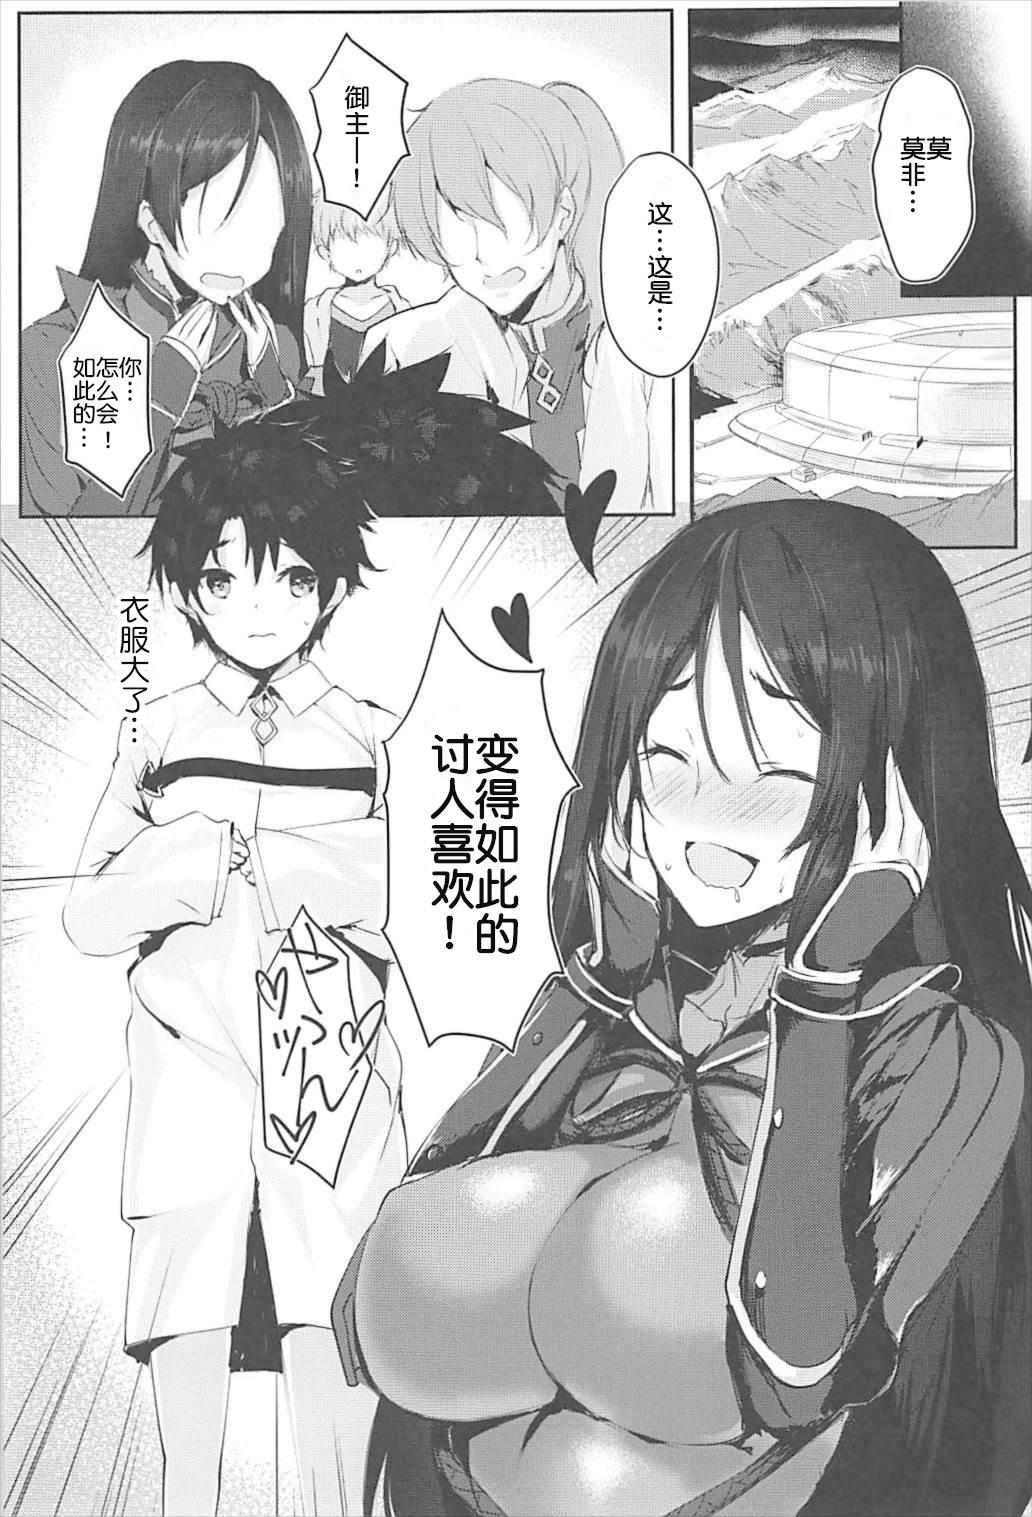 Orgasms CHALDEA NIGHT - Fate grand order Cougars - Page 2